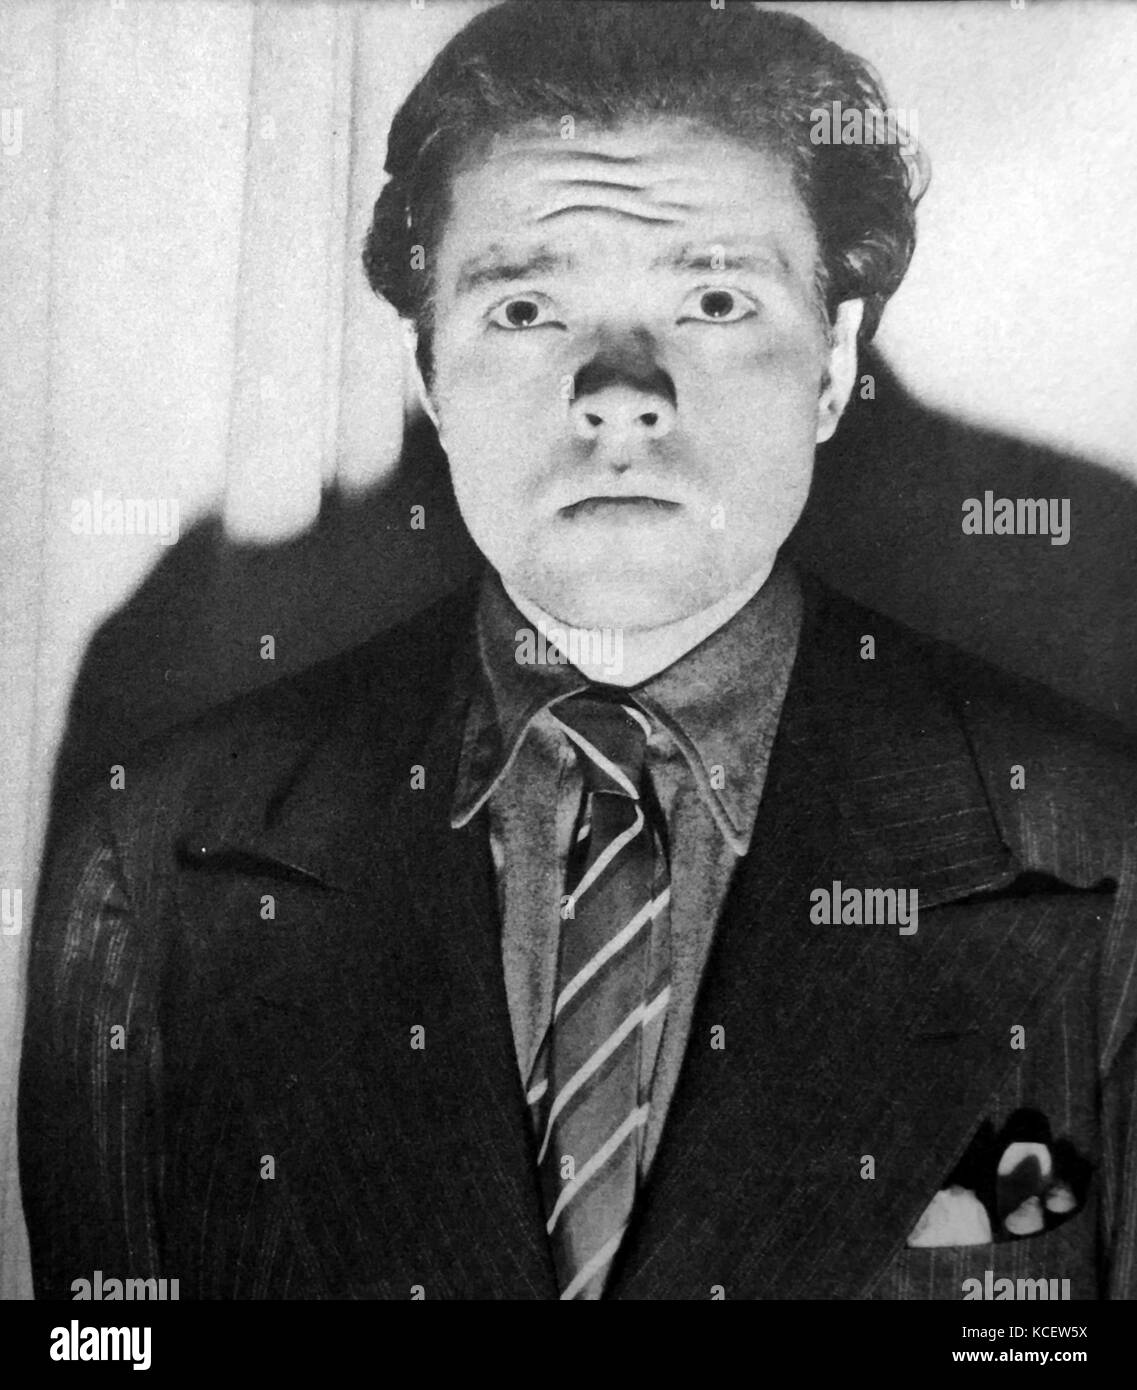 George Orson Welles (1915 – 1985) American actor, director, writer, and producer who worked in theatre, radio, and film, most notably Caesar (1937), a Broadway adaptation of William Shakespeare's Julius Caesar; in radio, the legendary 1938 broadcast 'The War of the Worlds'; and in film, Citizen Kane (1941), Stock Photo